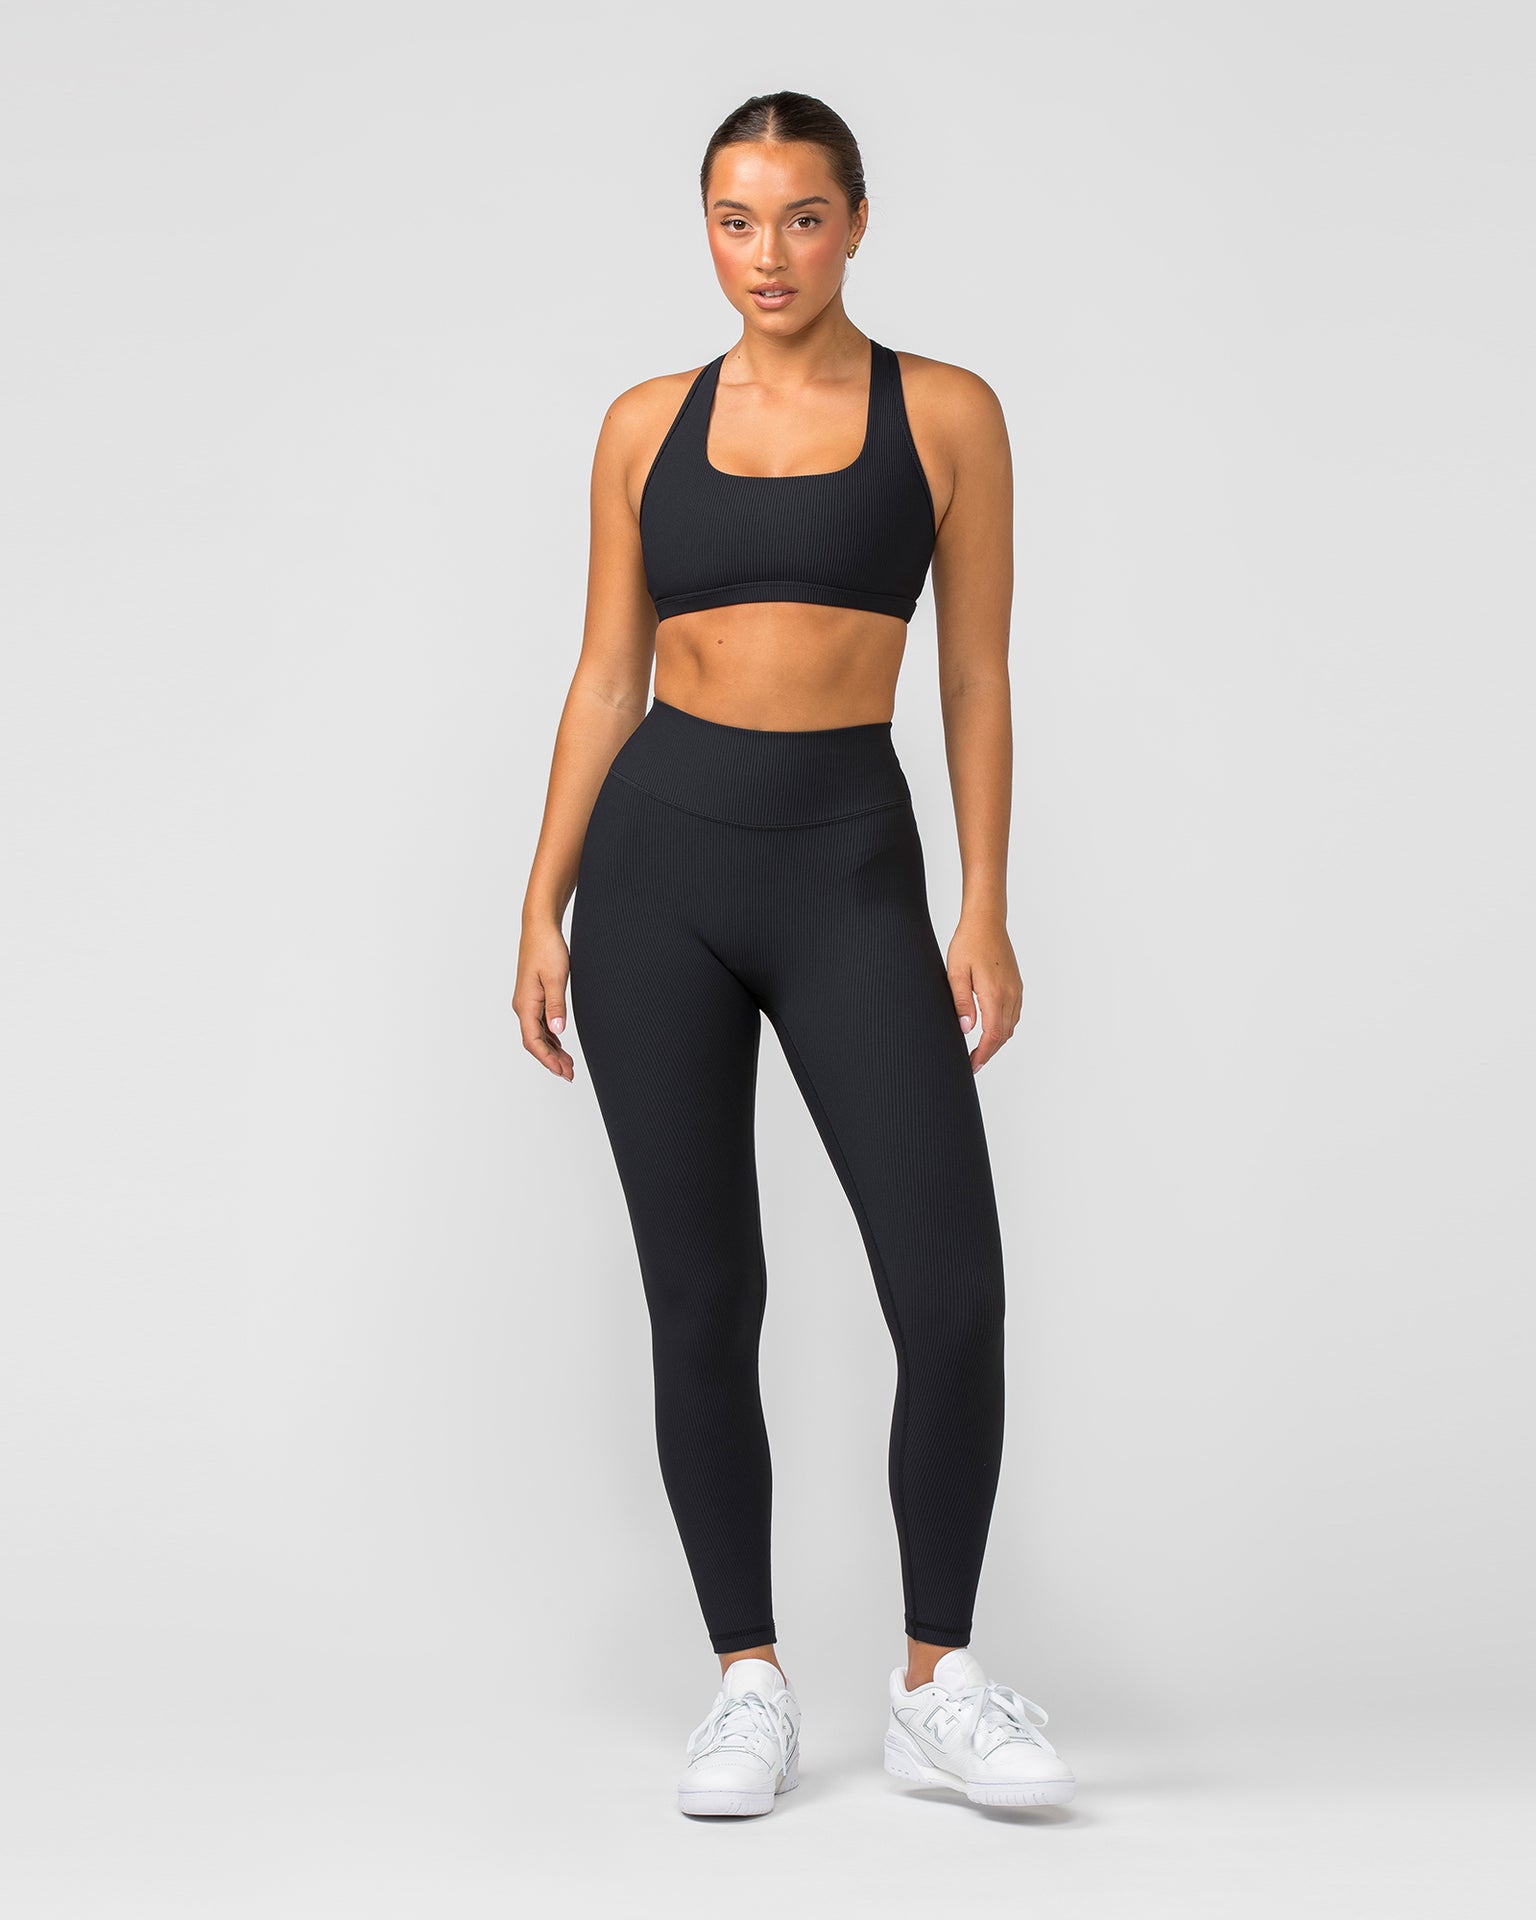 Elietian One Size Crop High Waisted Legging - New Moon Boutique